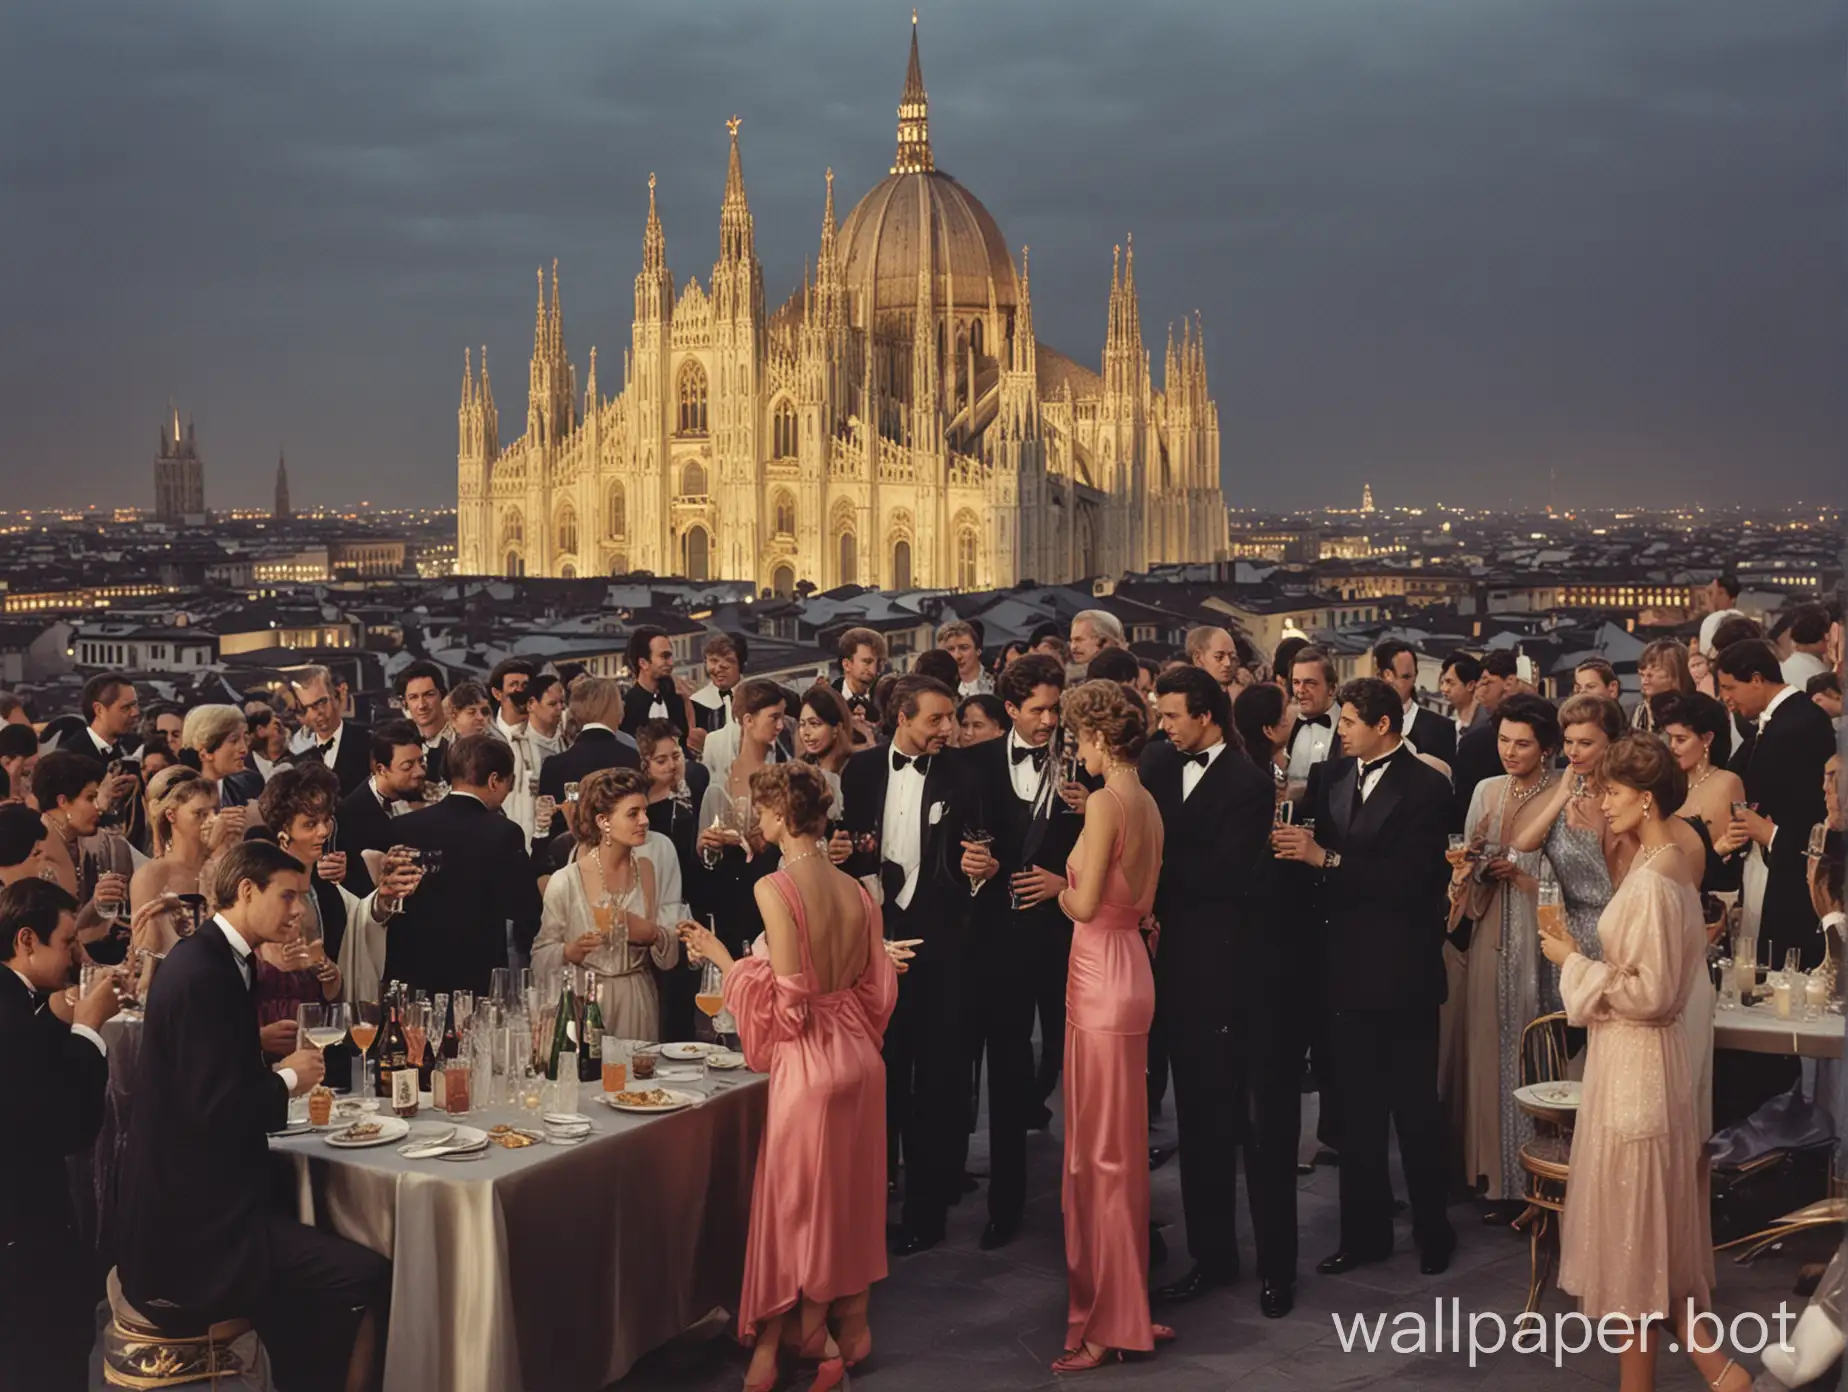 1985 full color photo, Illustrate a sophisticated cocktail party on a rooftop overlooking the majestic Milan Cathedral, with guests in chic 80s fashion enjoying panoramic views of the city